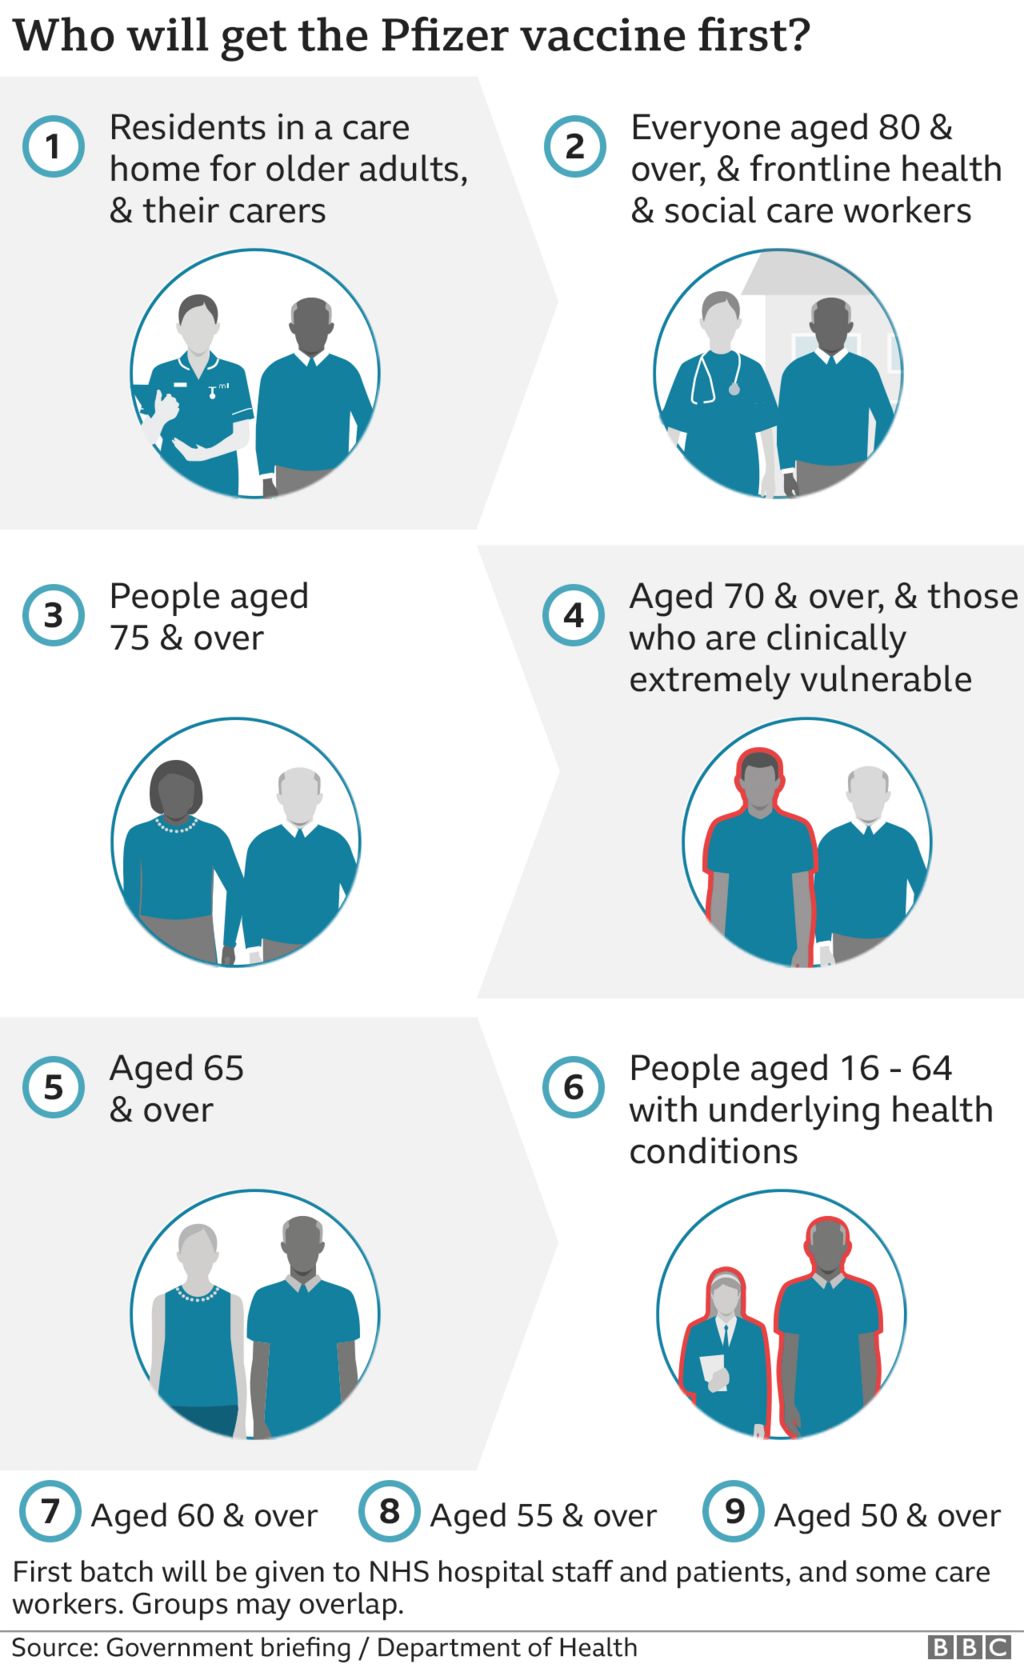 Graphic outlining how the Pfizer vaccine will be prioritised among different groups